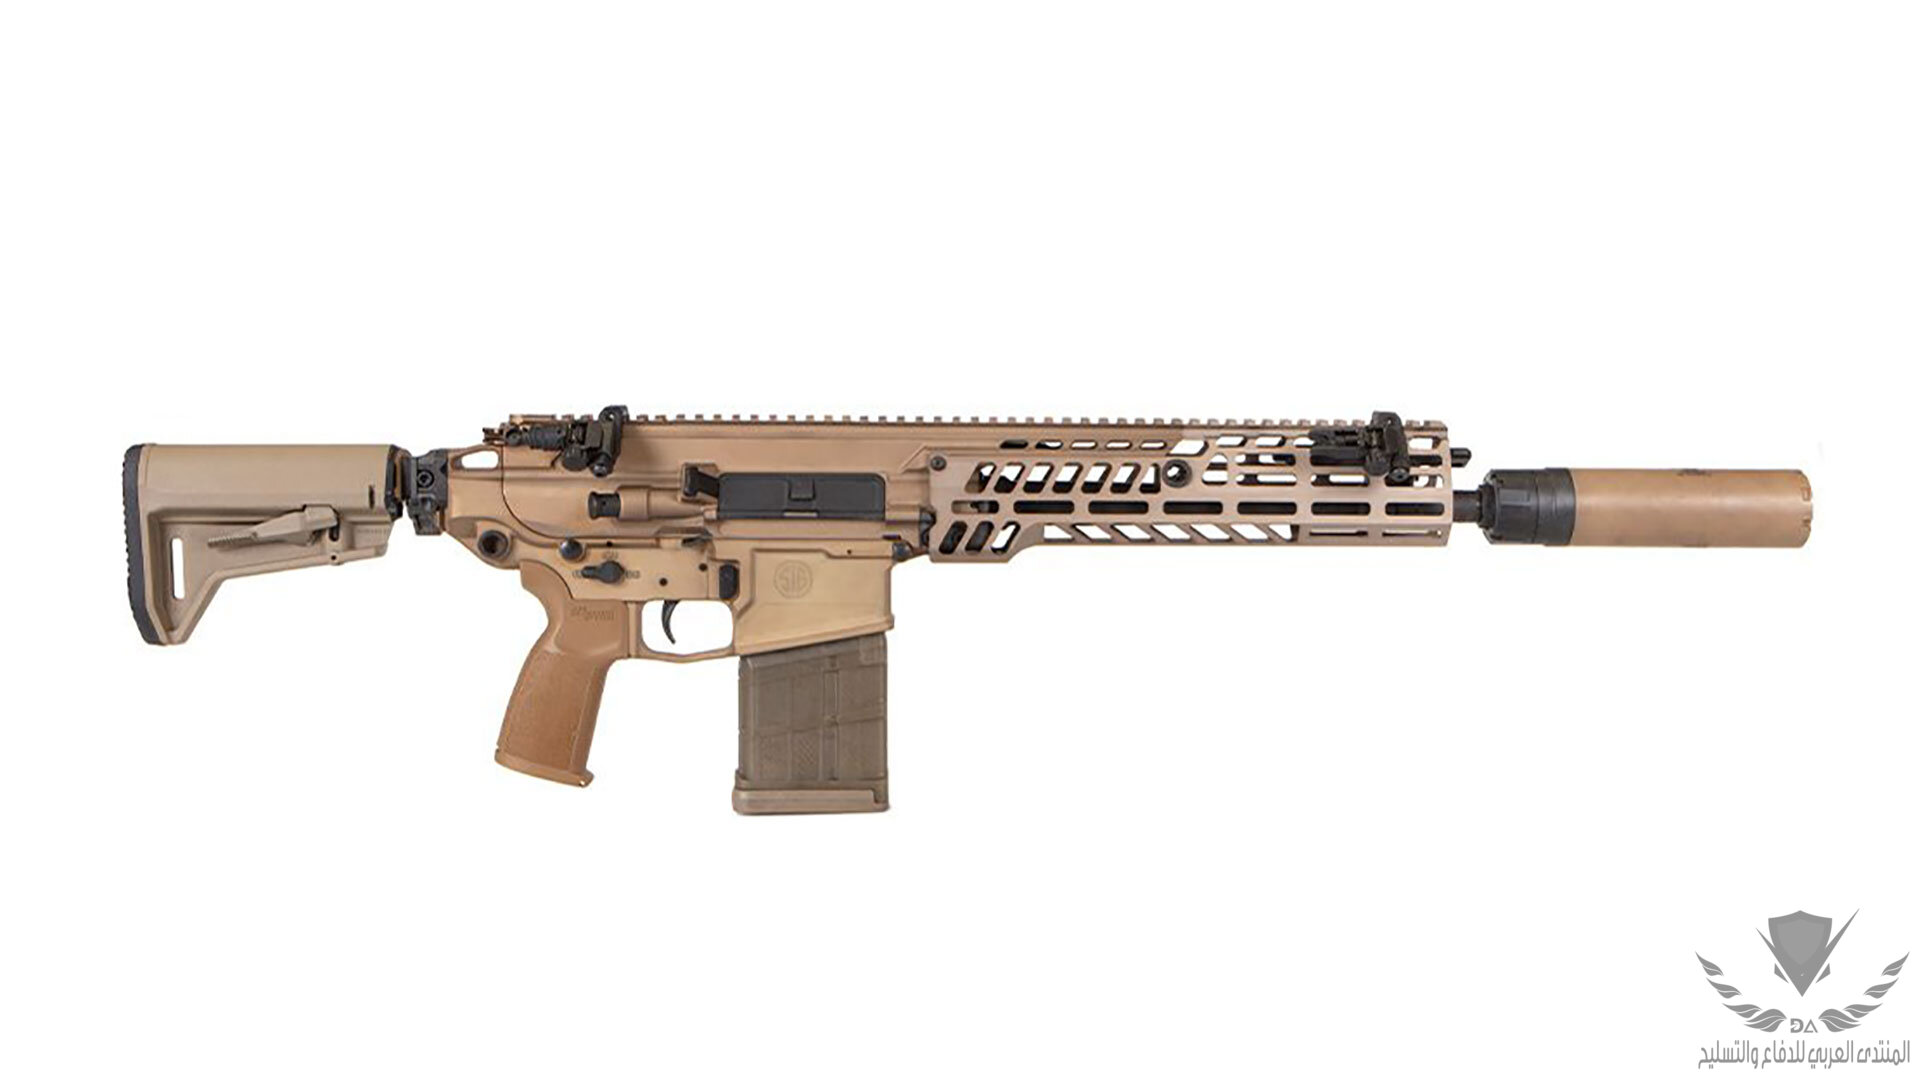 sig-sauer-mcx-spear-ngsw-rifle-2022-f.jpg